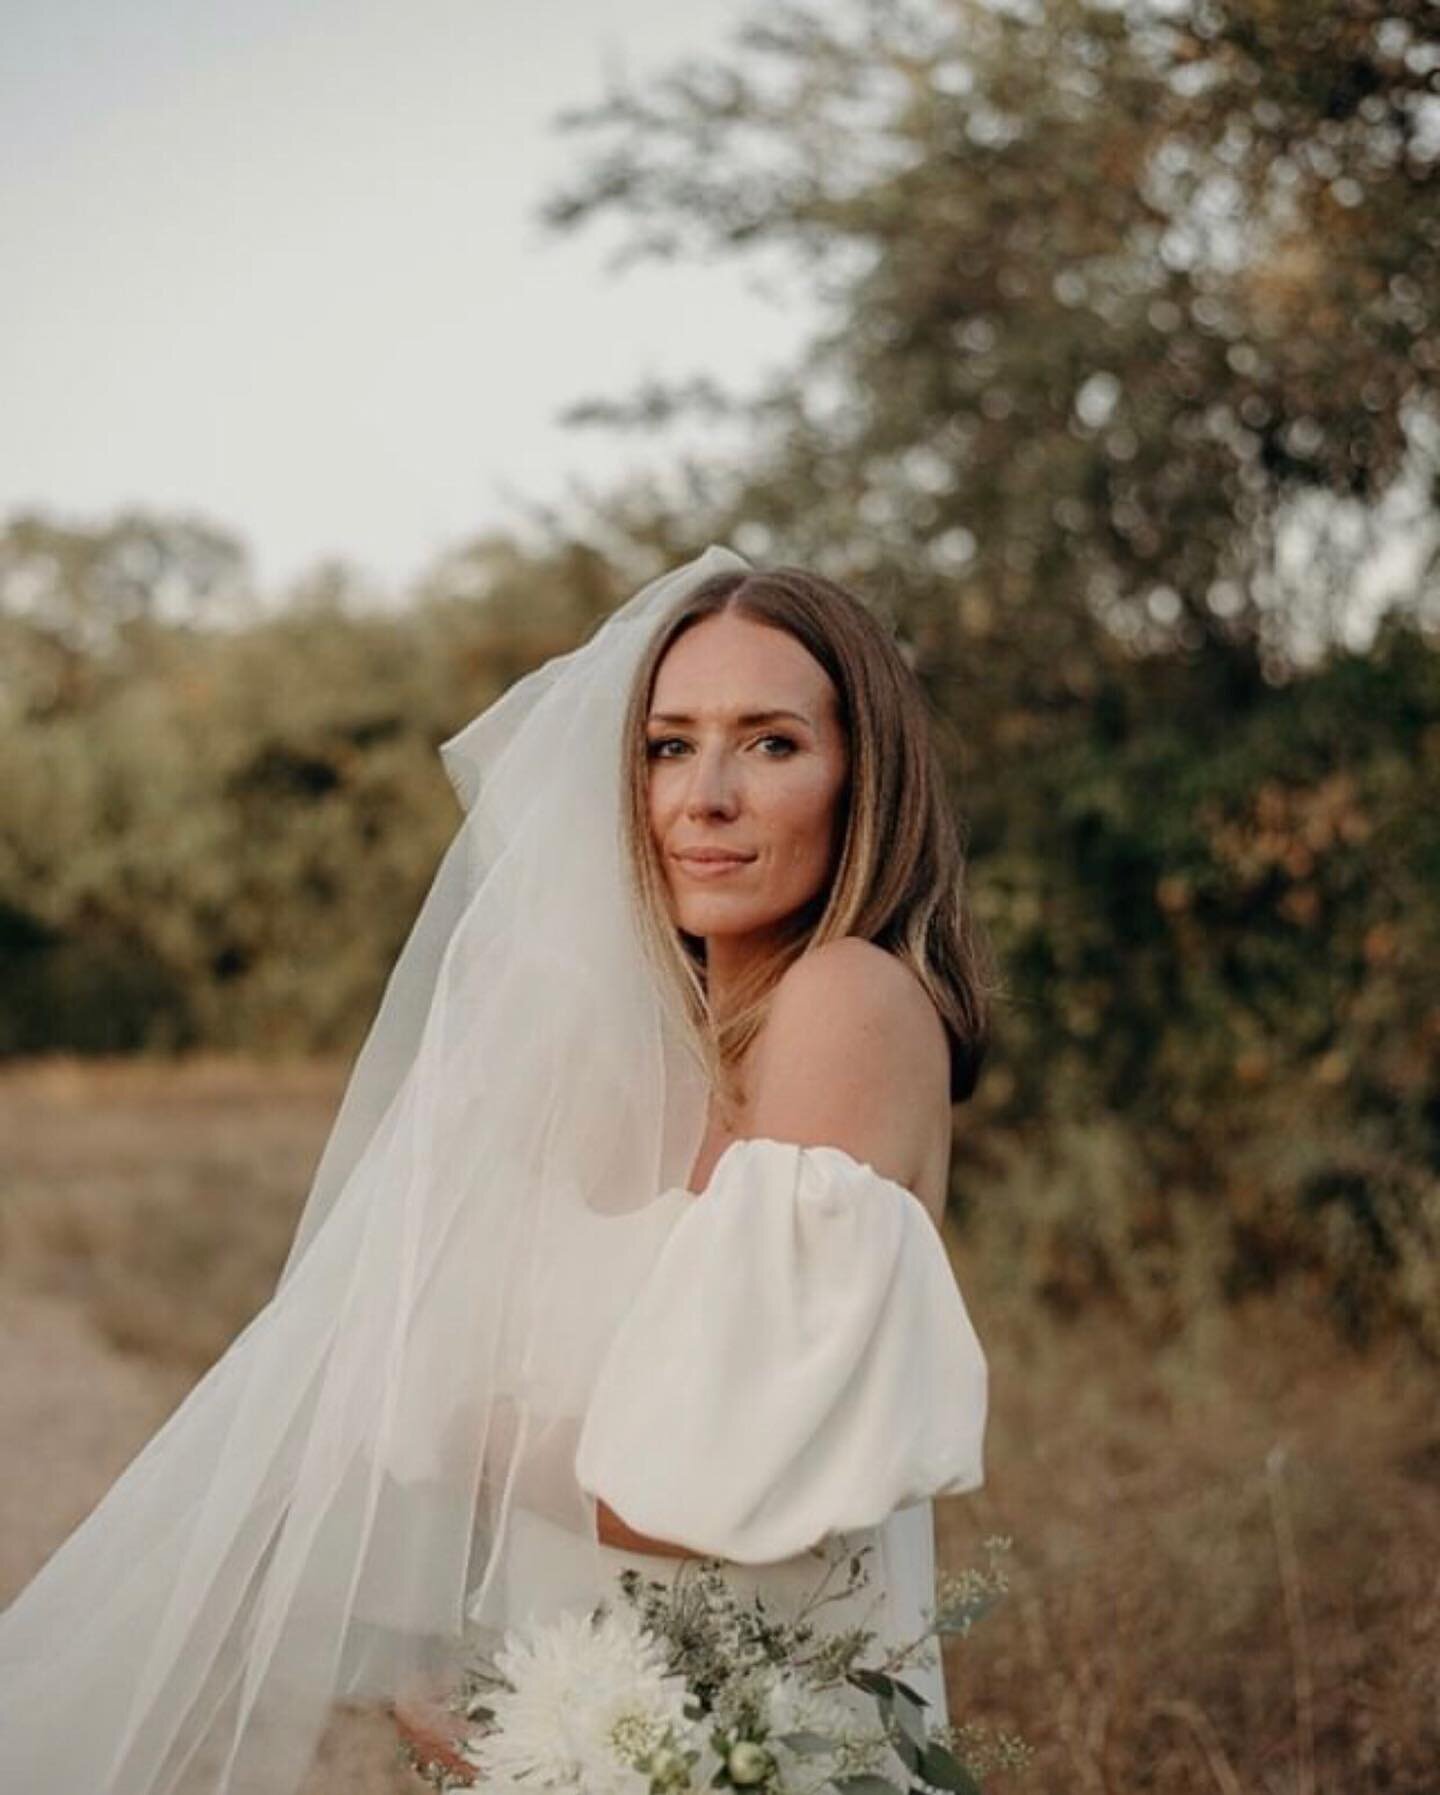 The most glorious #AMFbride Kathryn 🖤

Kathryn chose the mist veil to compliment her @kamperett dress (one my favourite bridal designers- thanks to @thefallbride for the introduction!)
Head over to @_anti_bride for full pics of this magical wedding.